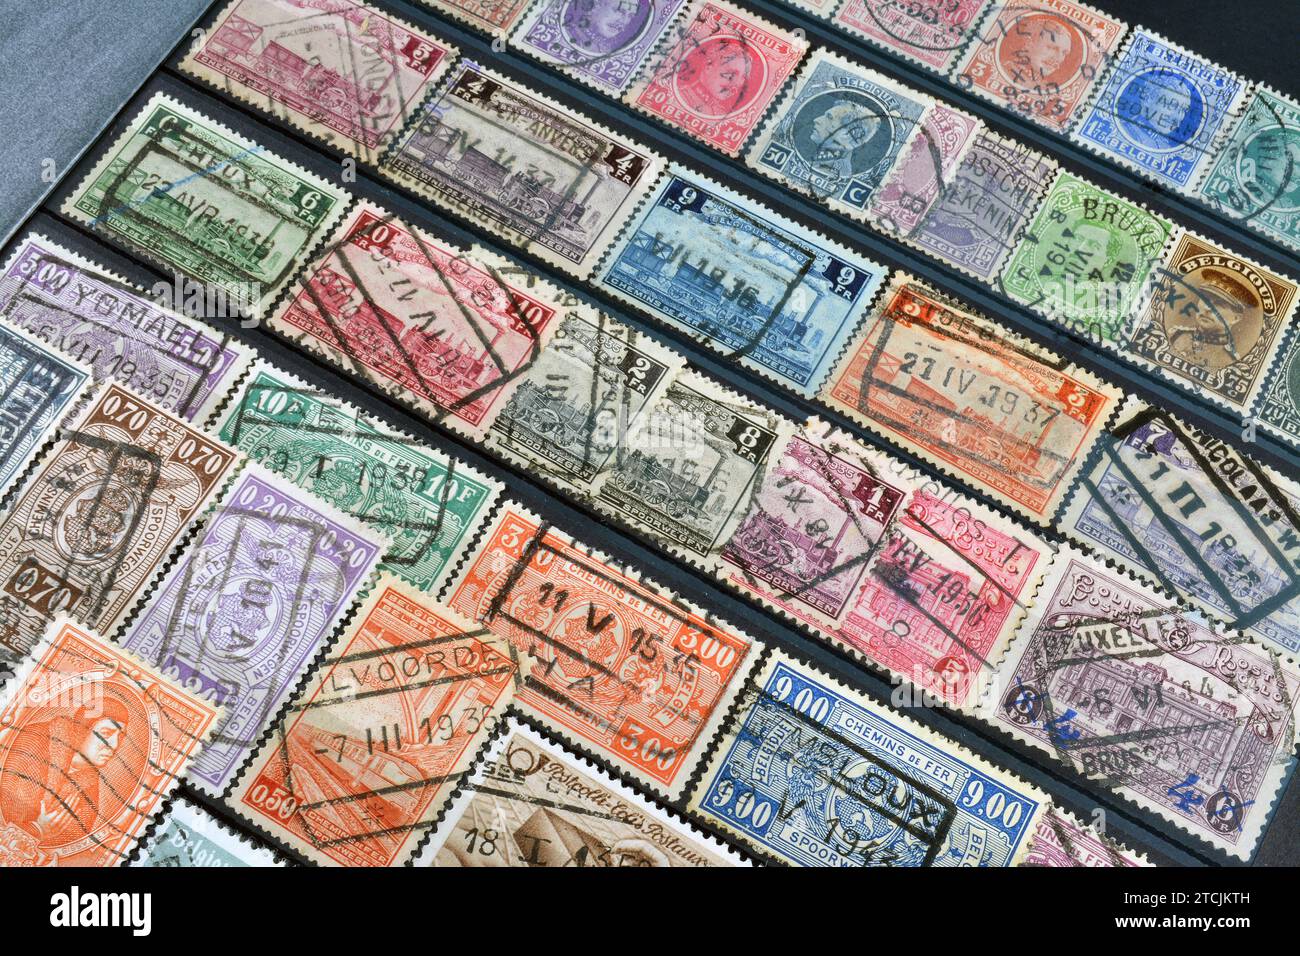 Cancelled postage stamps printed by Belgium, that show different motives from Belgium, circa 1900-1960. Stock Photo